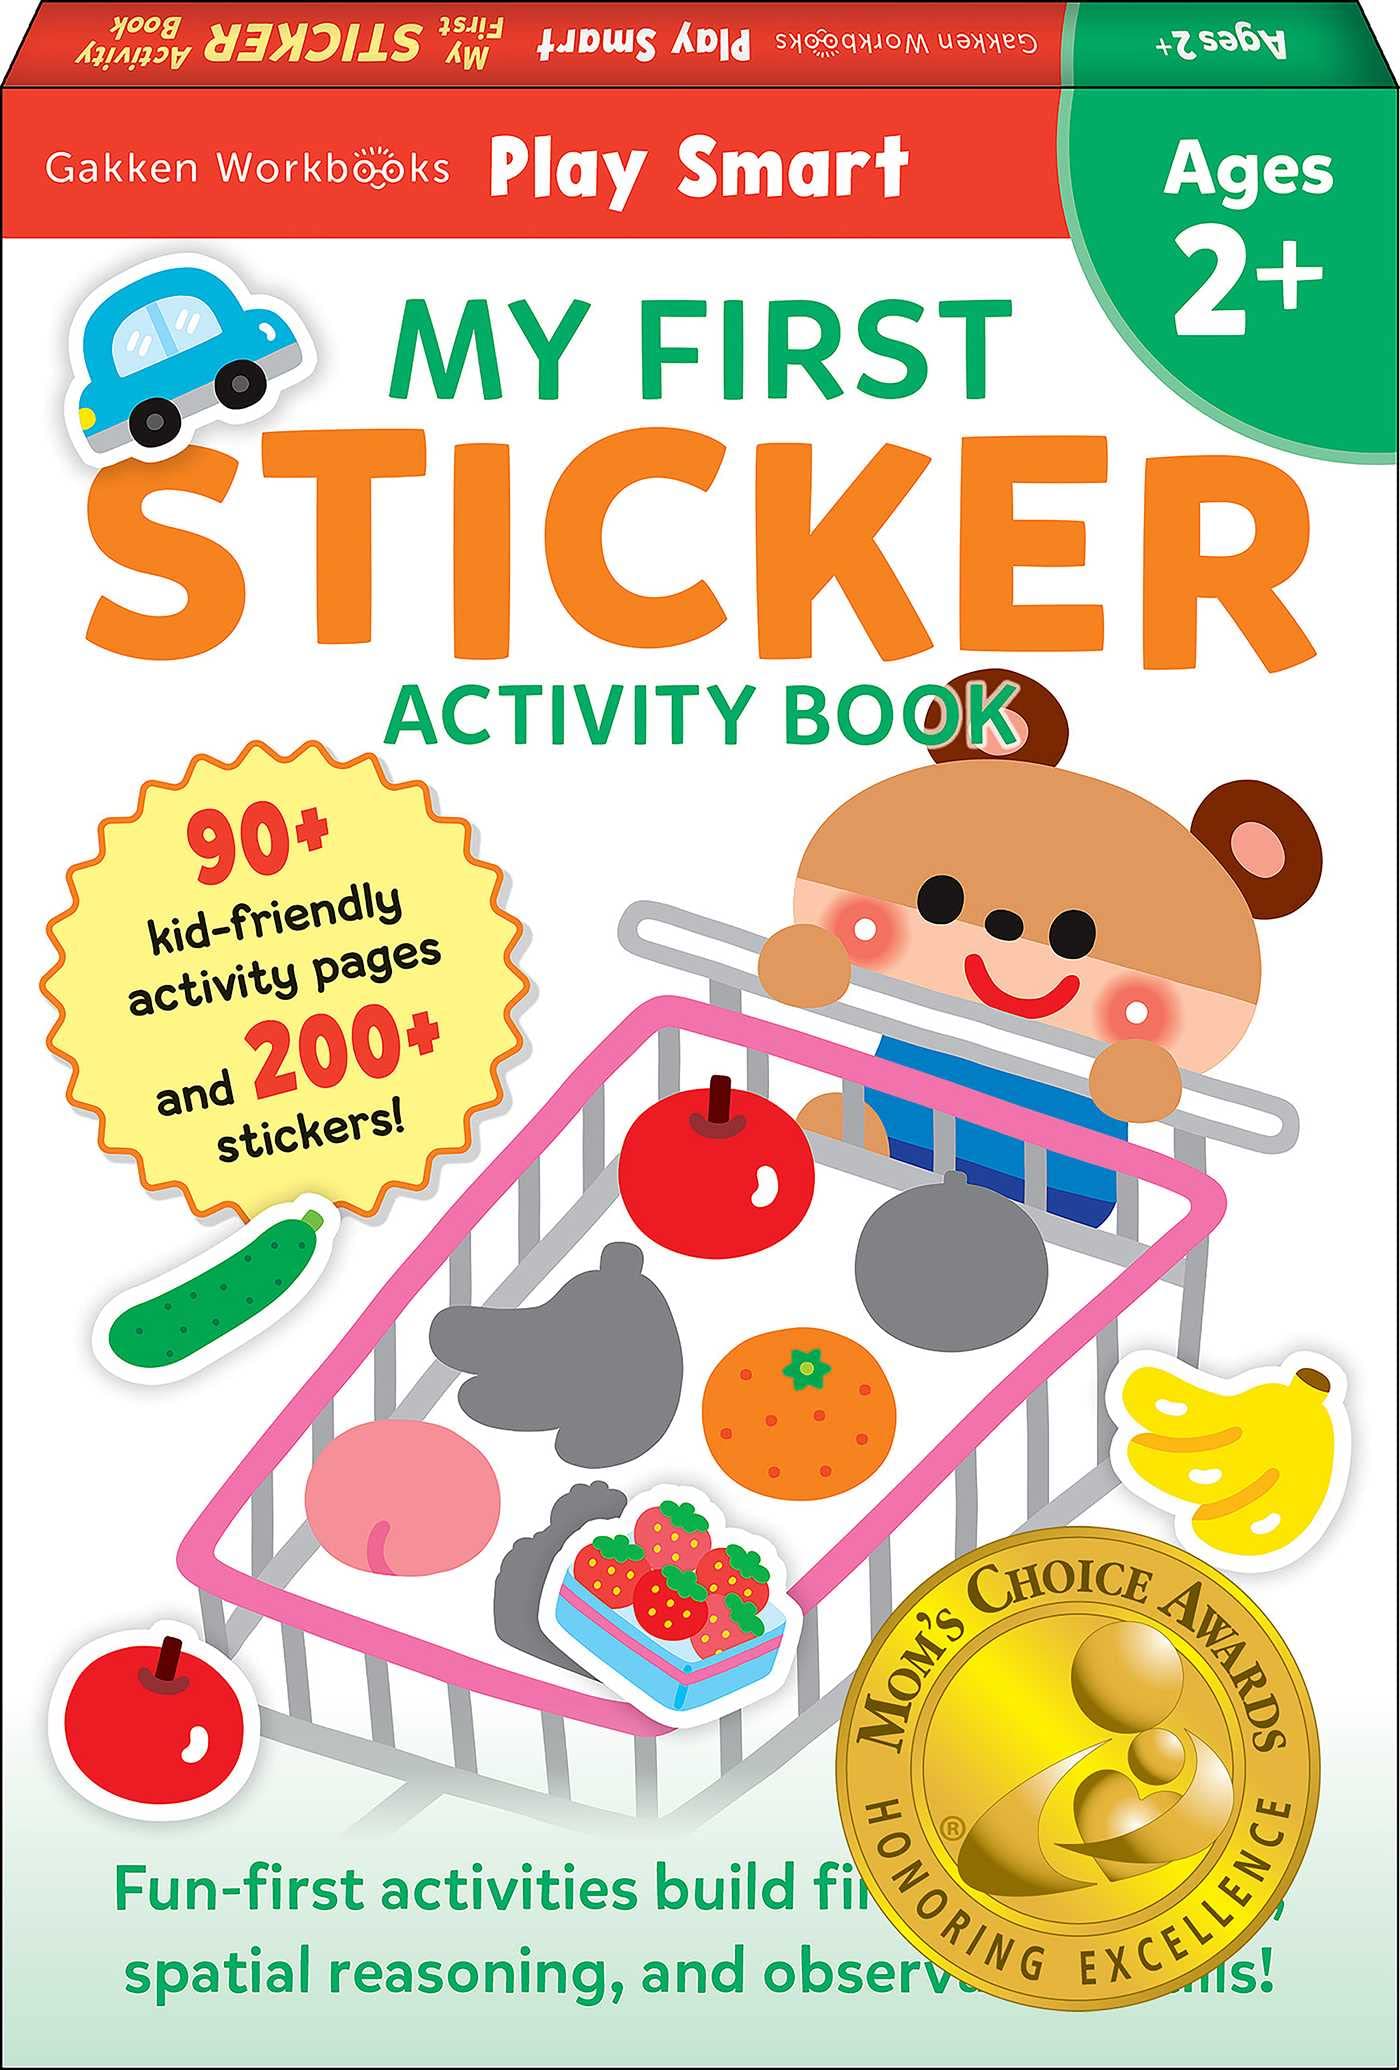 Play Smart My First Sticker Book 2+: Preschool Activity Workbook with 200+ Stickers for Children with Small Hands Ages 2, 3, 4: Fine Motor Skills (Ful by Gakken Early Childhood Experts